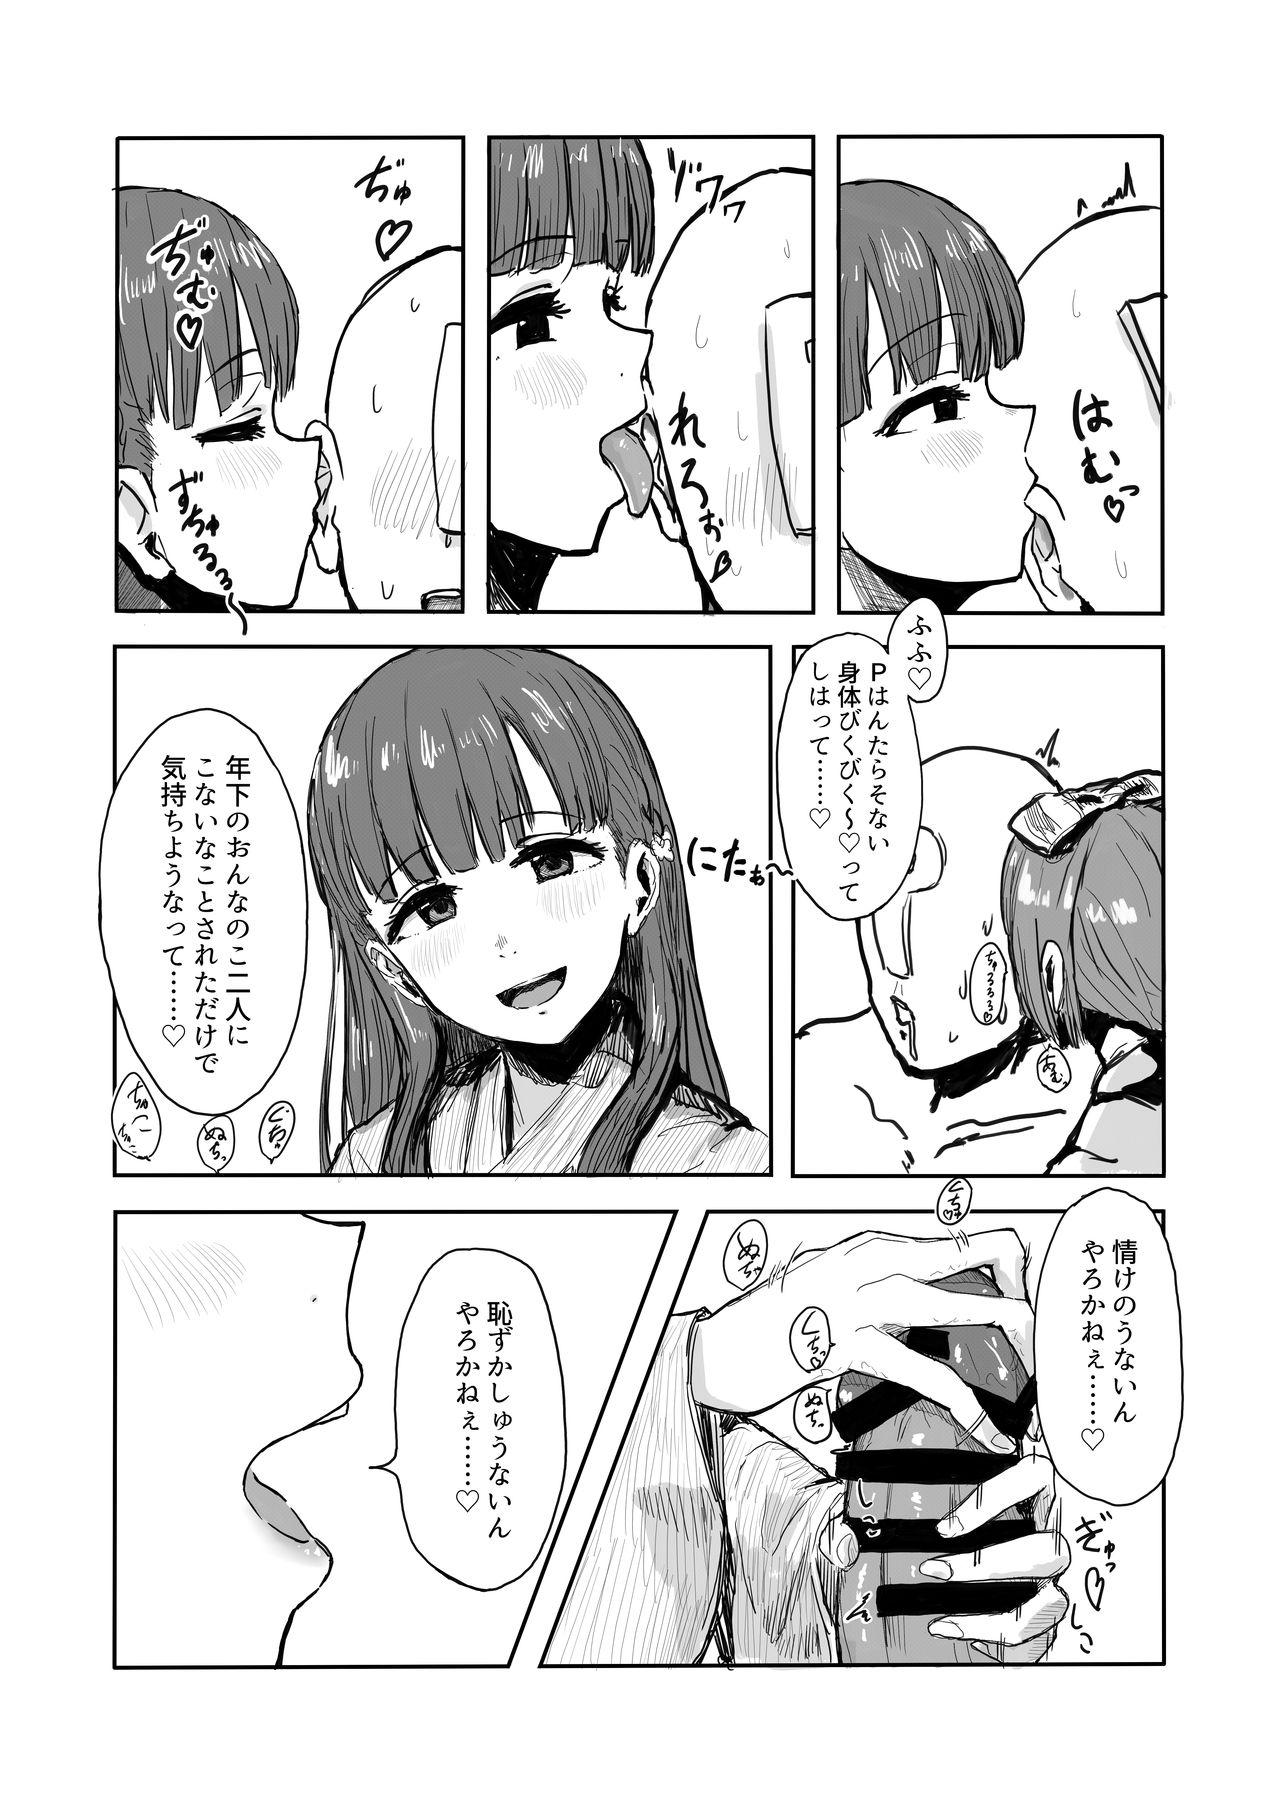 Ass To Mouth 小早川紗枝と依田芳乃のダブル淫語囁き乳首性感耳舐め手コキ - The idolmaster Marido - Page 3